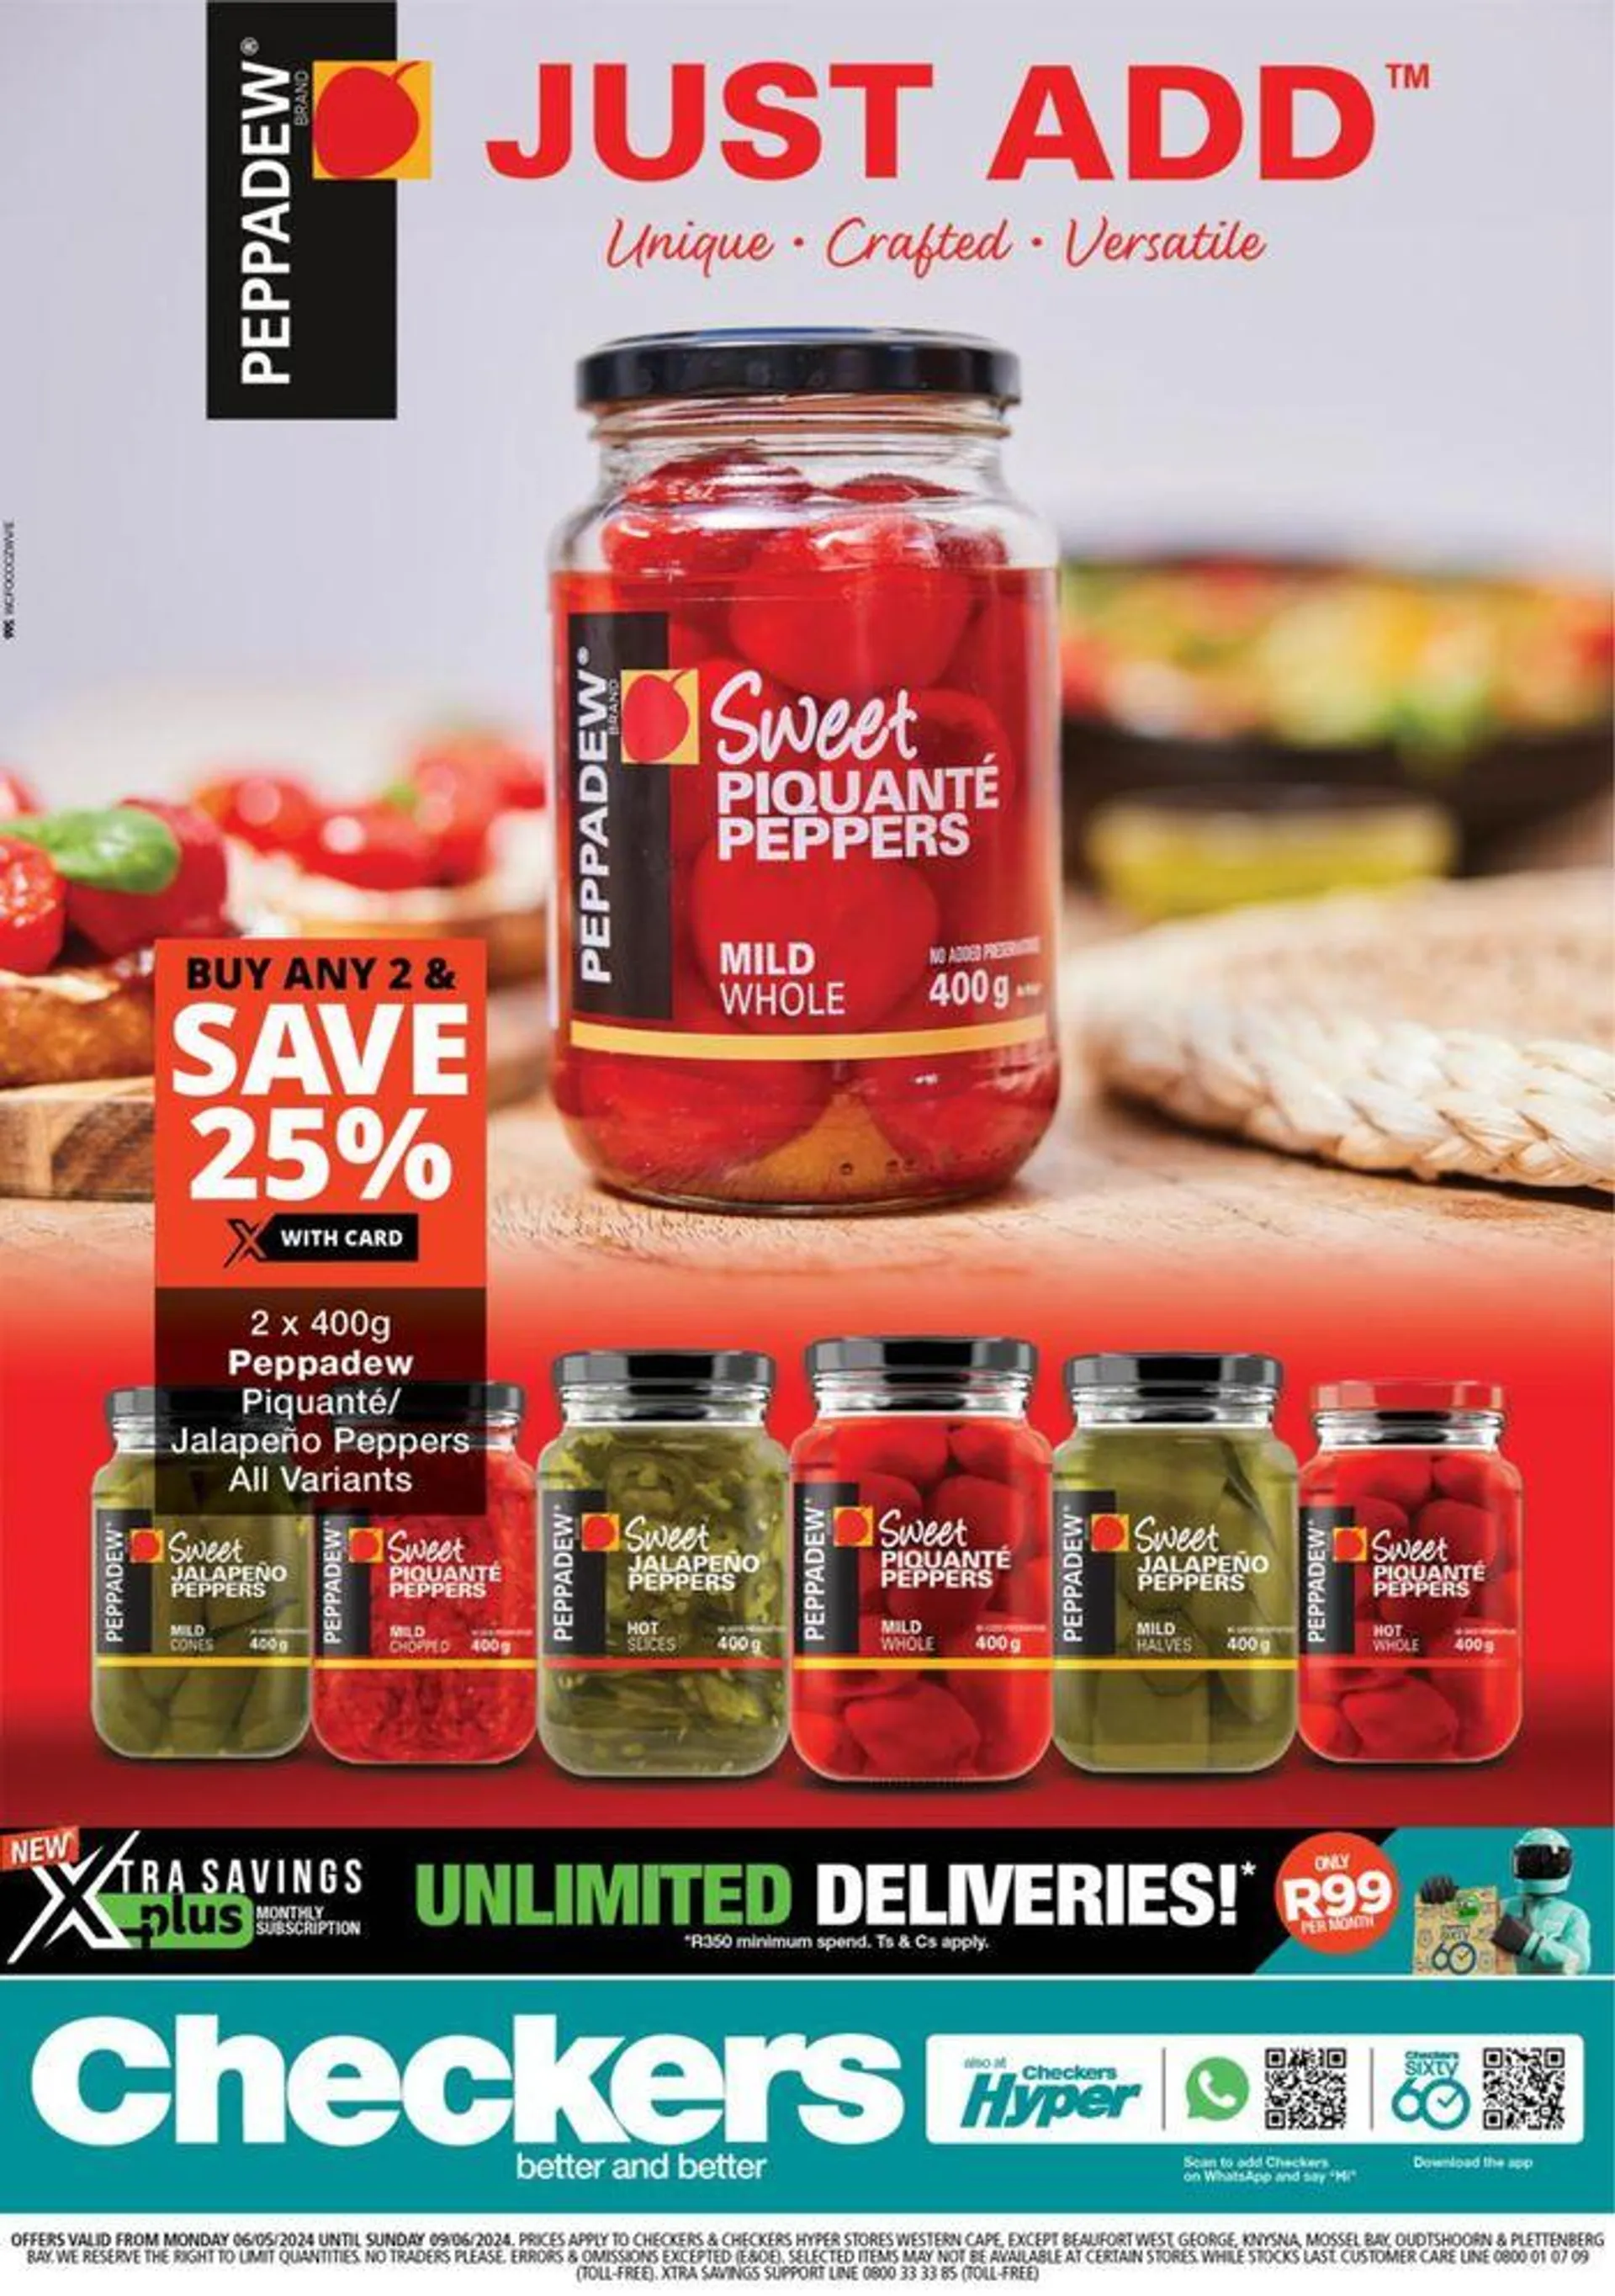 Checkers Peppadew Promotion 6 May - 9 June - 1